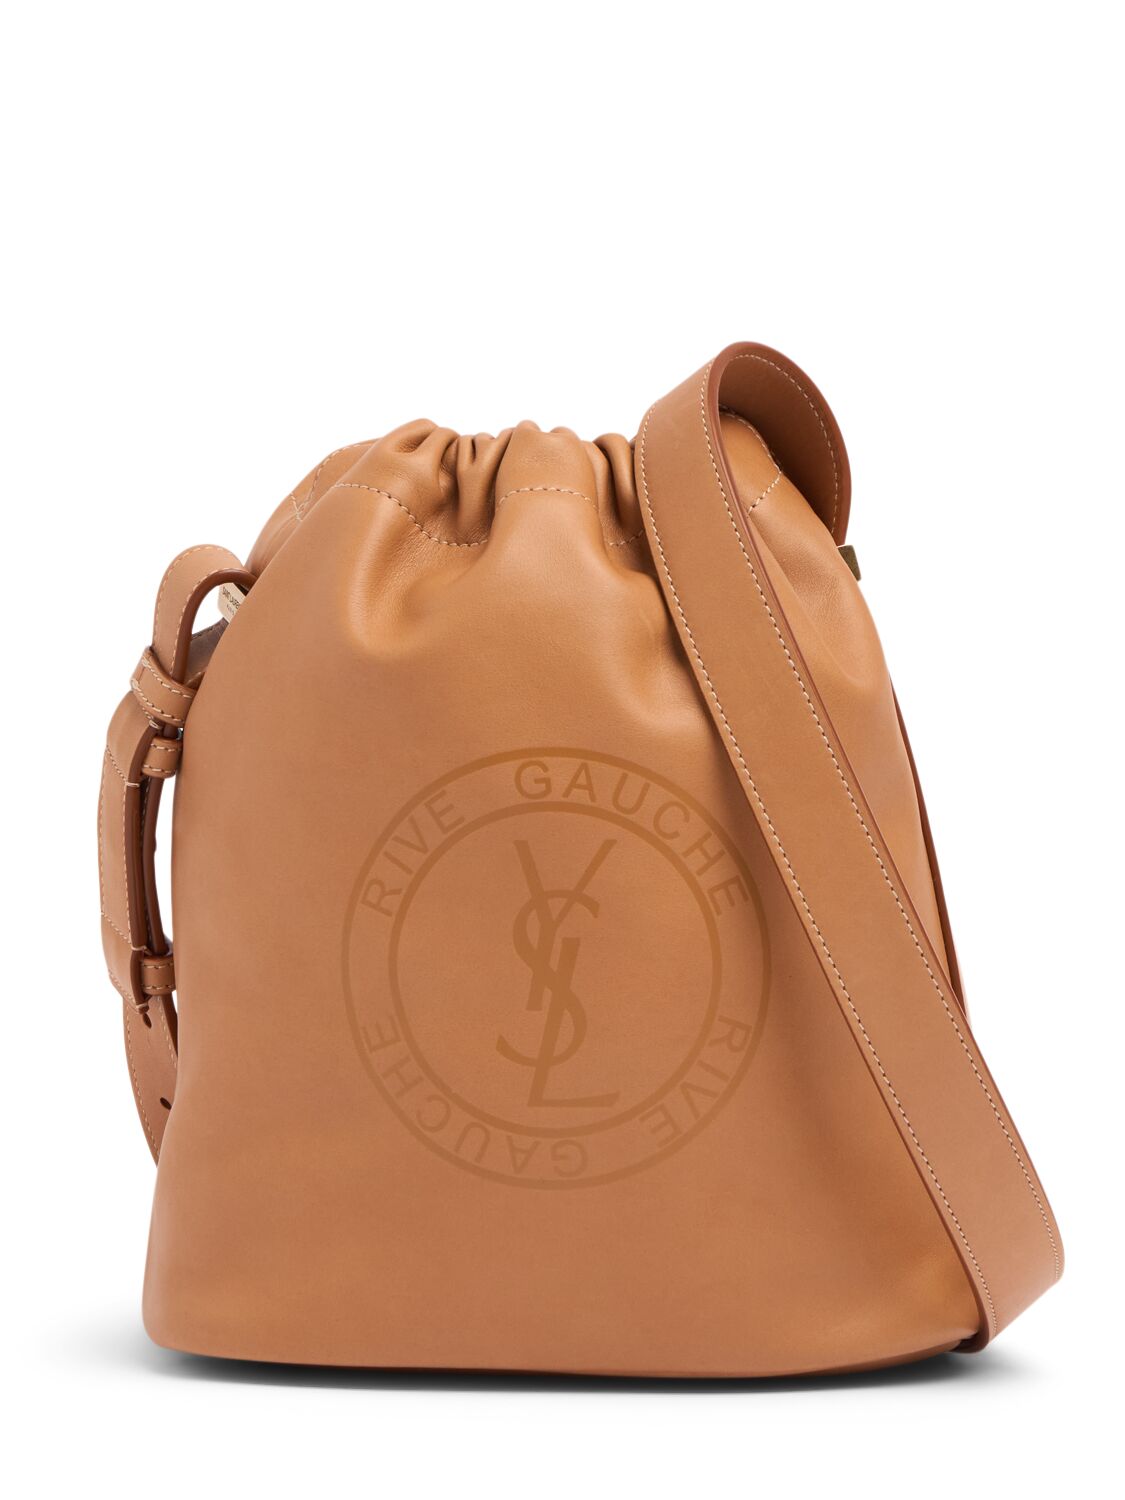 Rive Gauche Laced Leather Bucket Bag